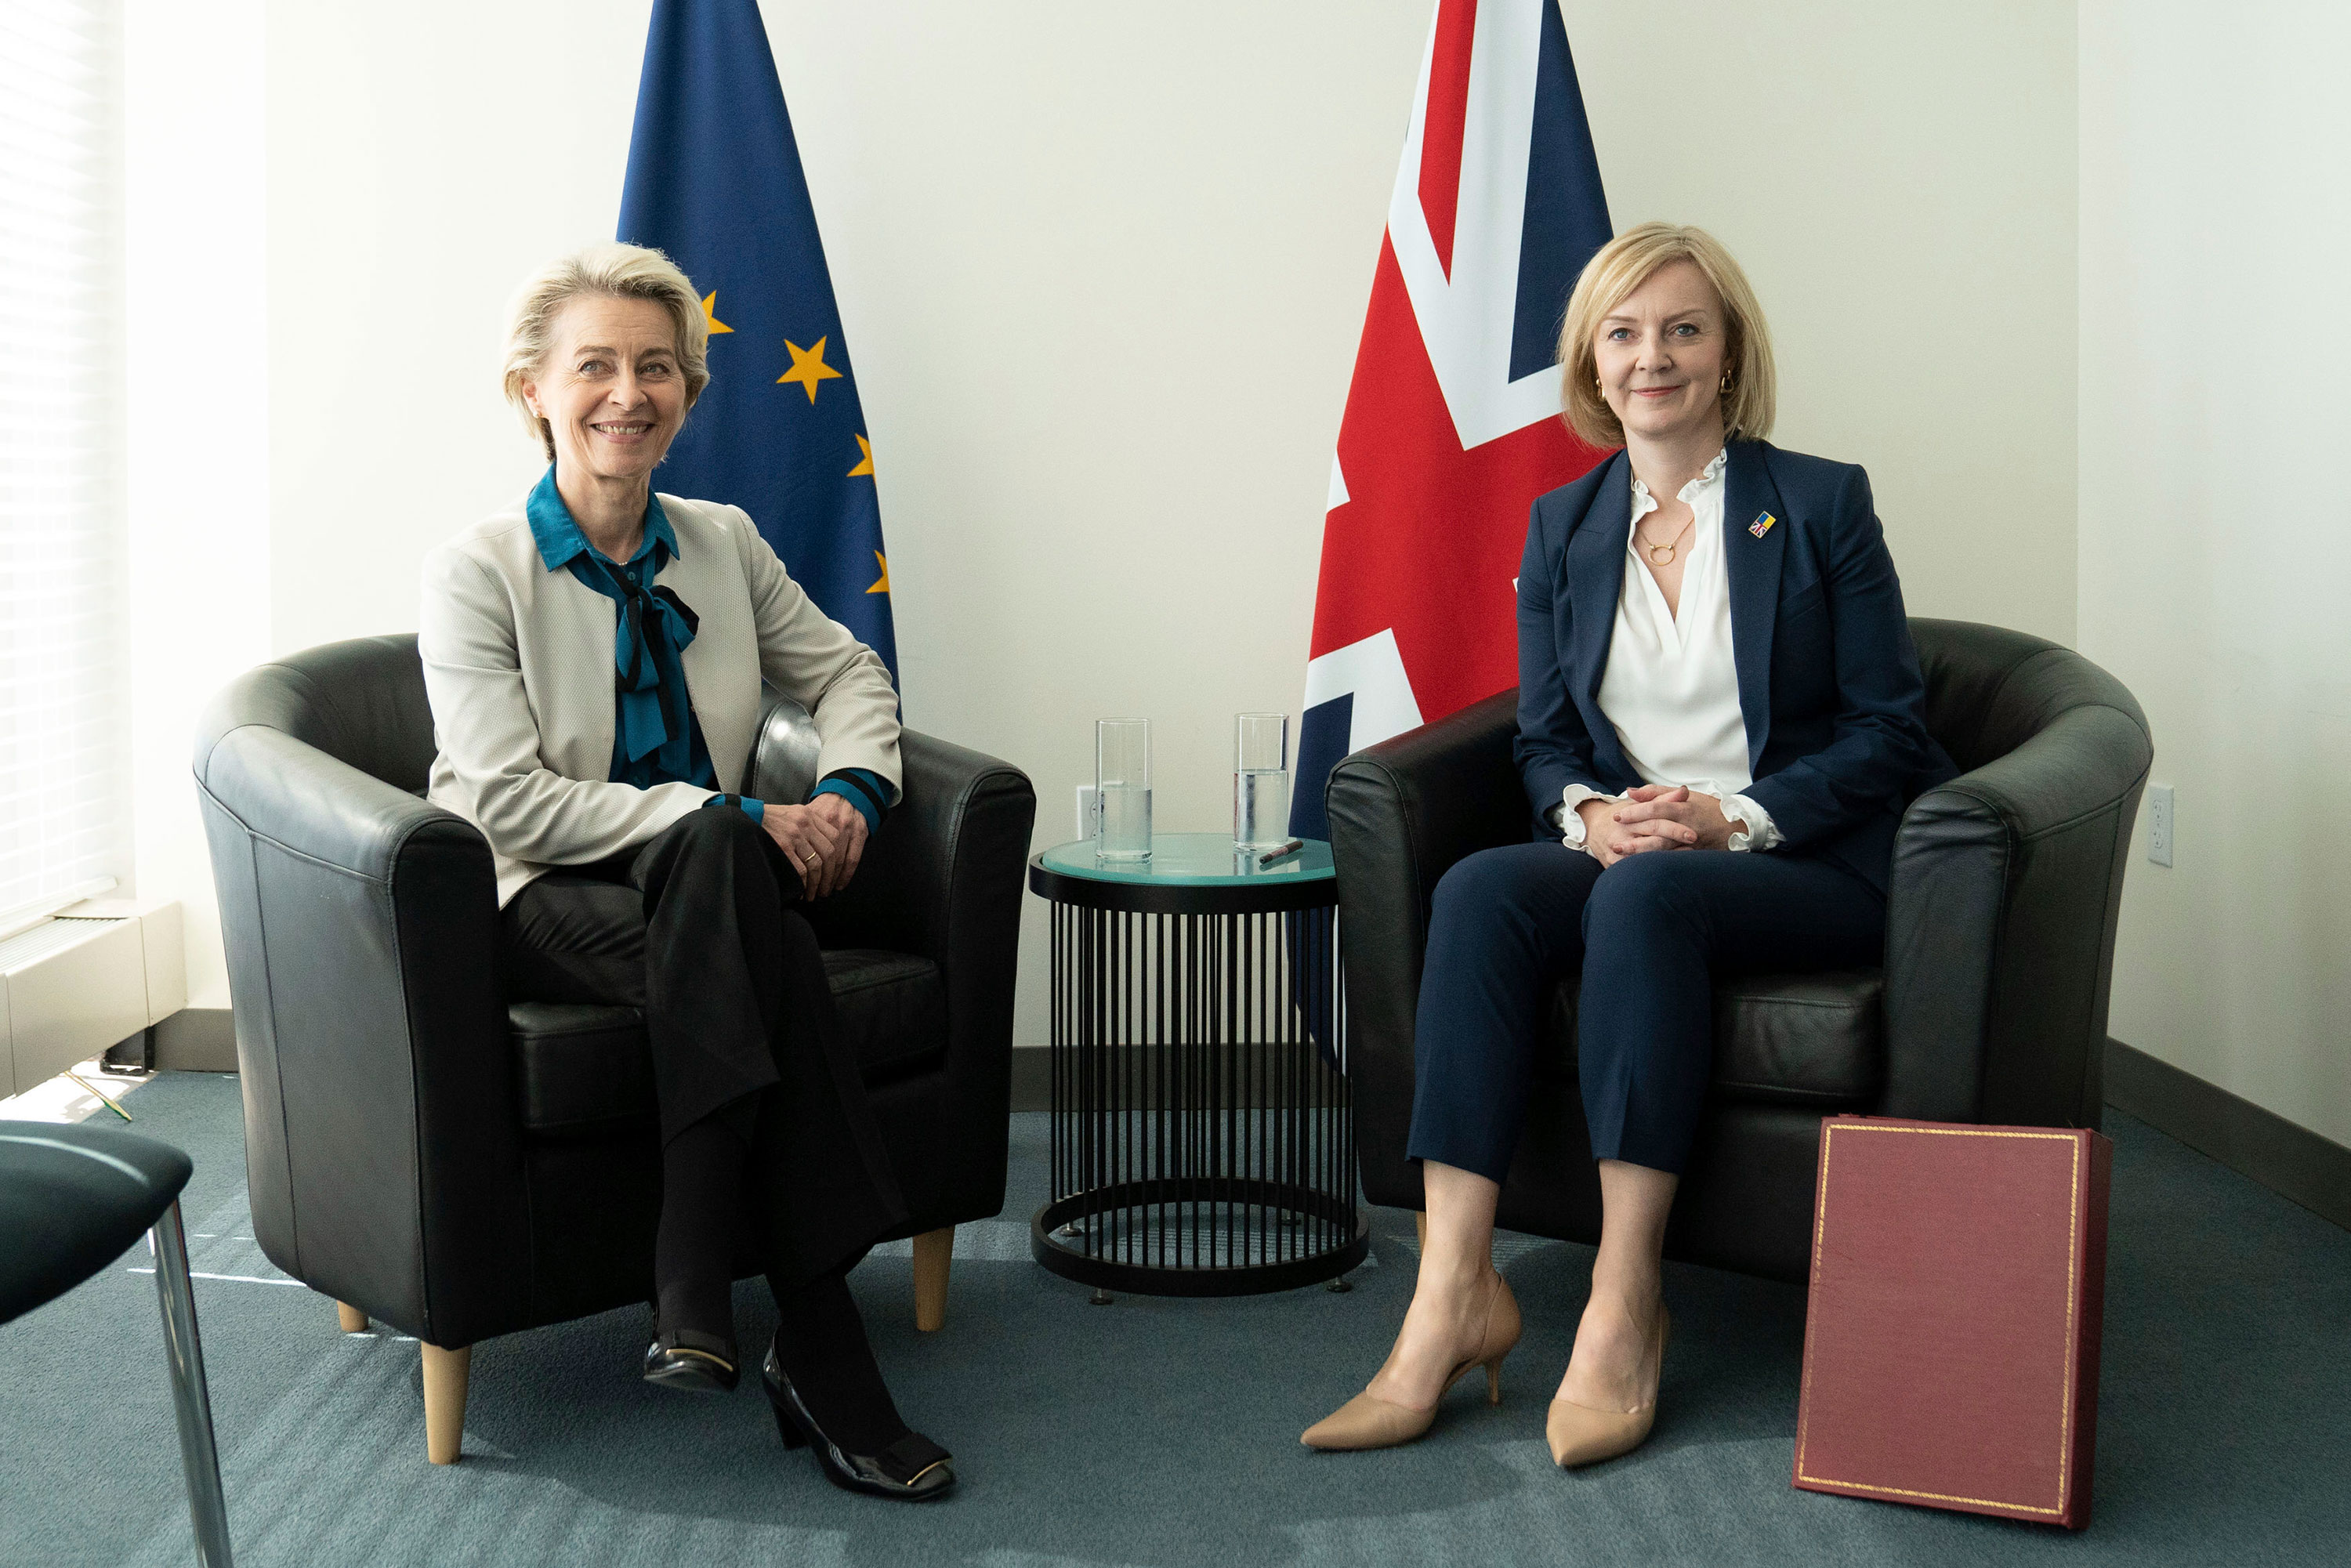 European Commission President Ursula Von Der Leyen, left, and British Prime Minister Liz Truss, right, pose for photos during a bilateral meeting during the 77th UN General Assembly in New York on Wednesday.